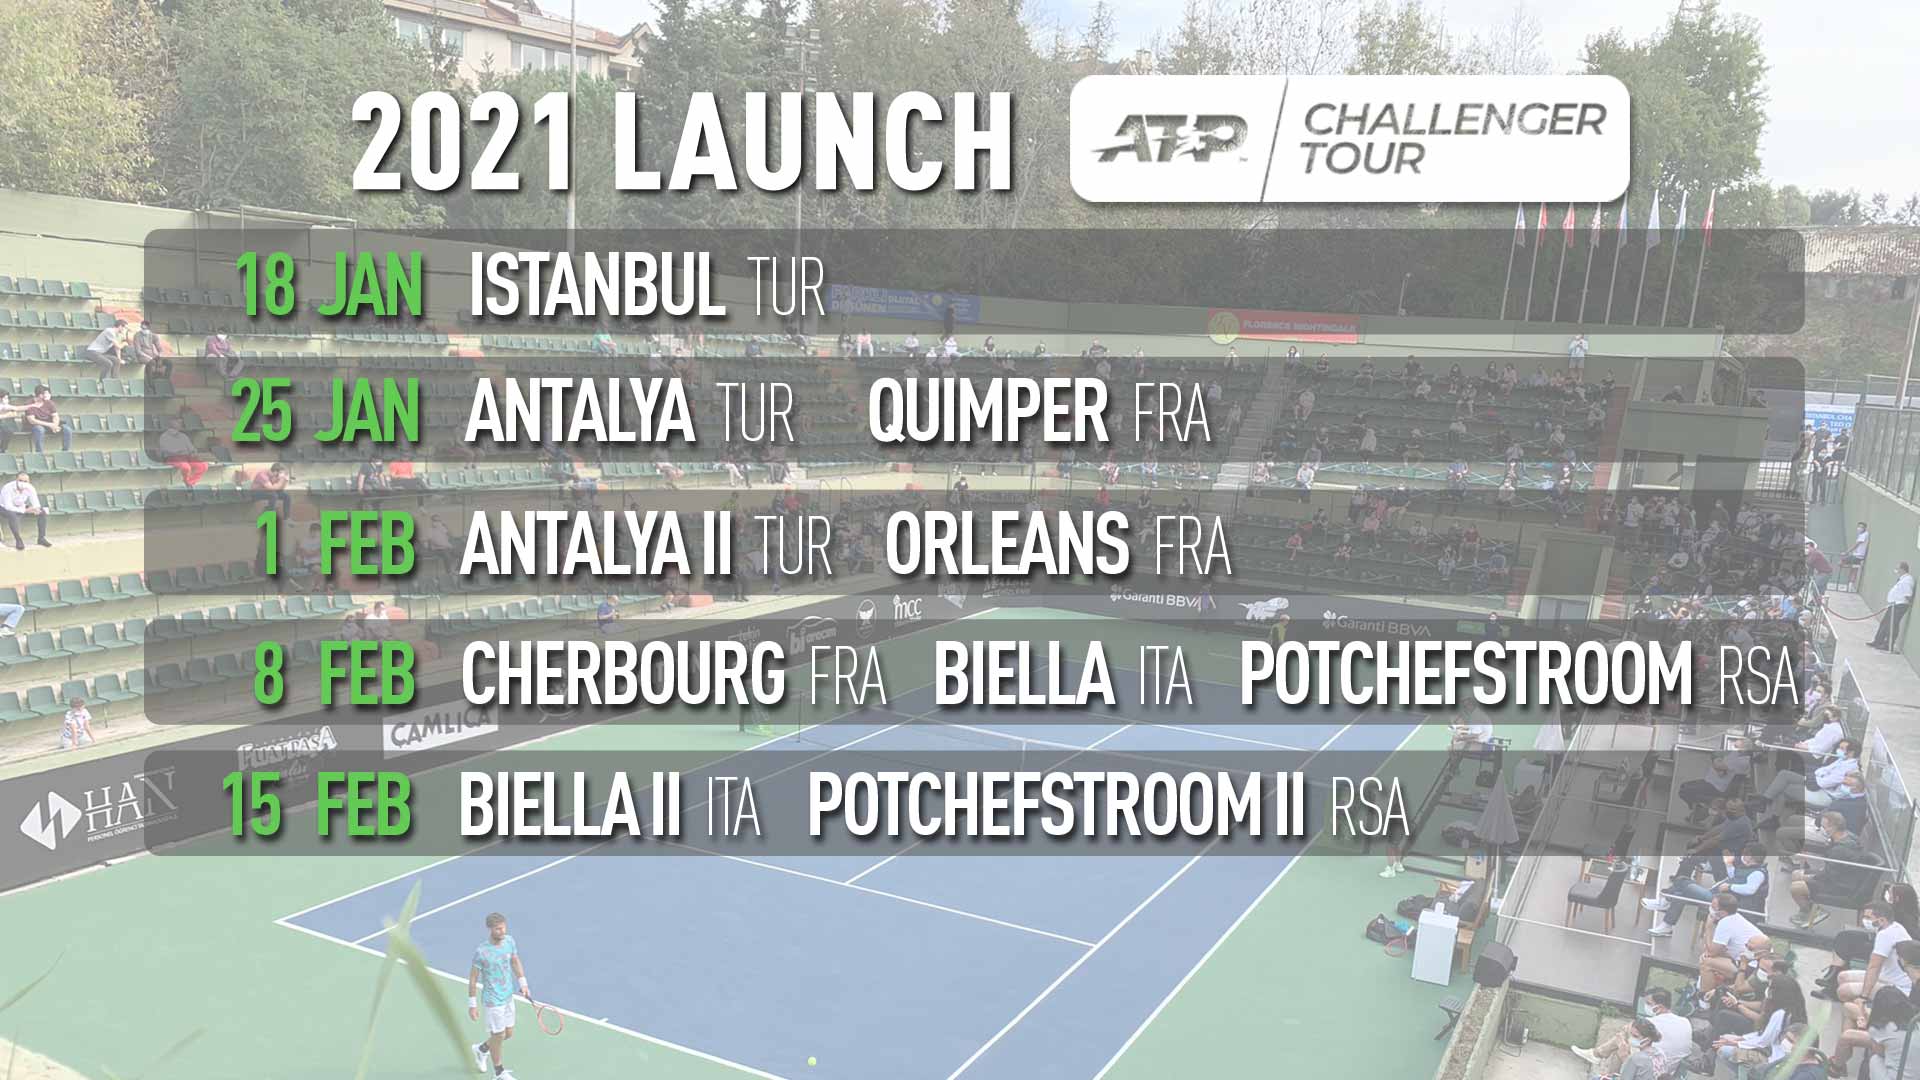 what is tennis challenger tour